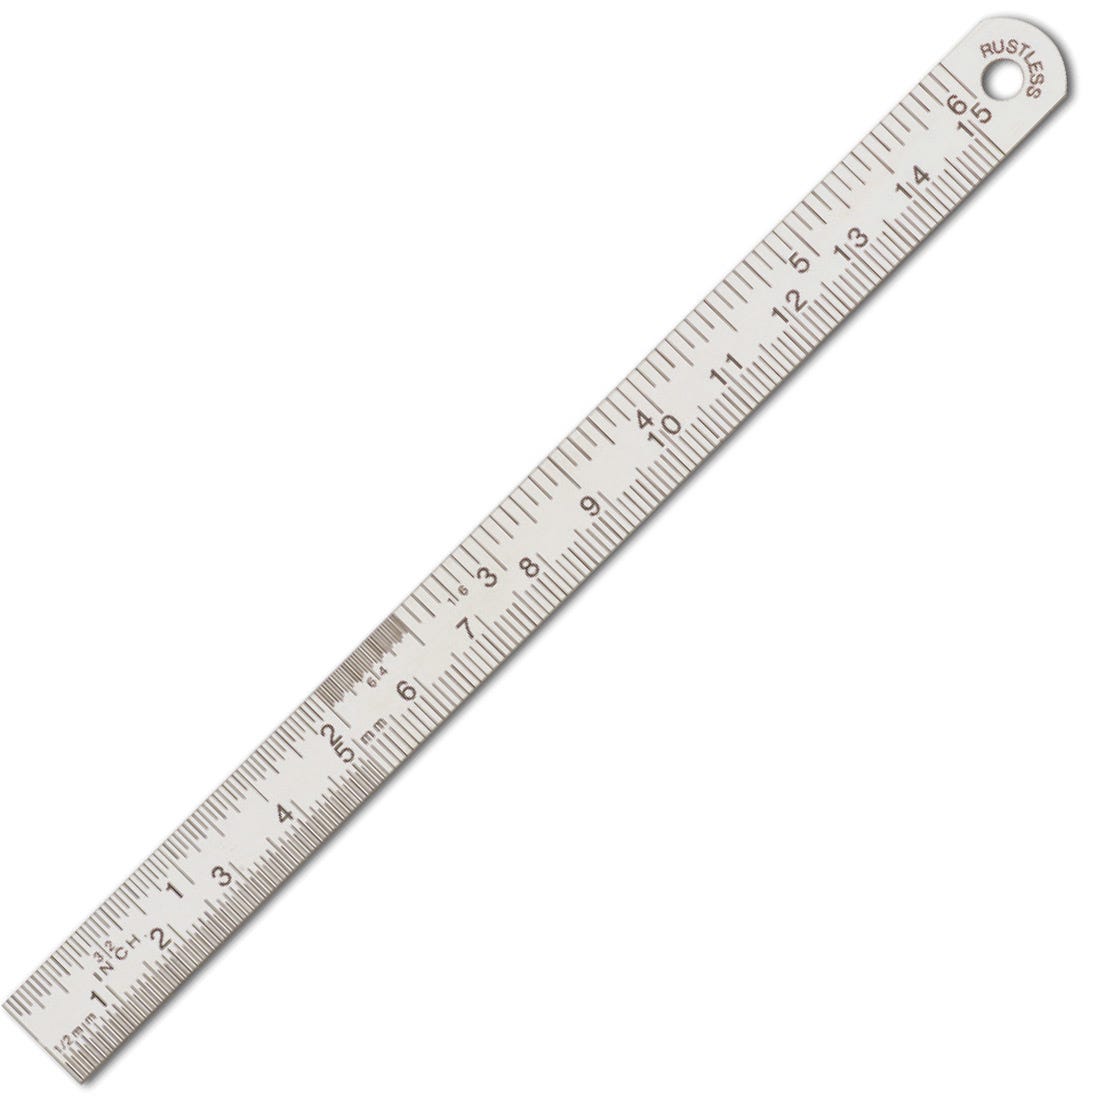 ACE Stainless Steel Ruler - Inches And Millimeter Markings, 1/2" x 6"